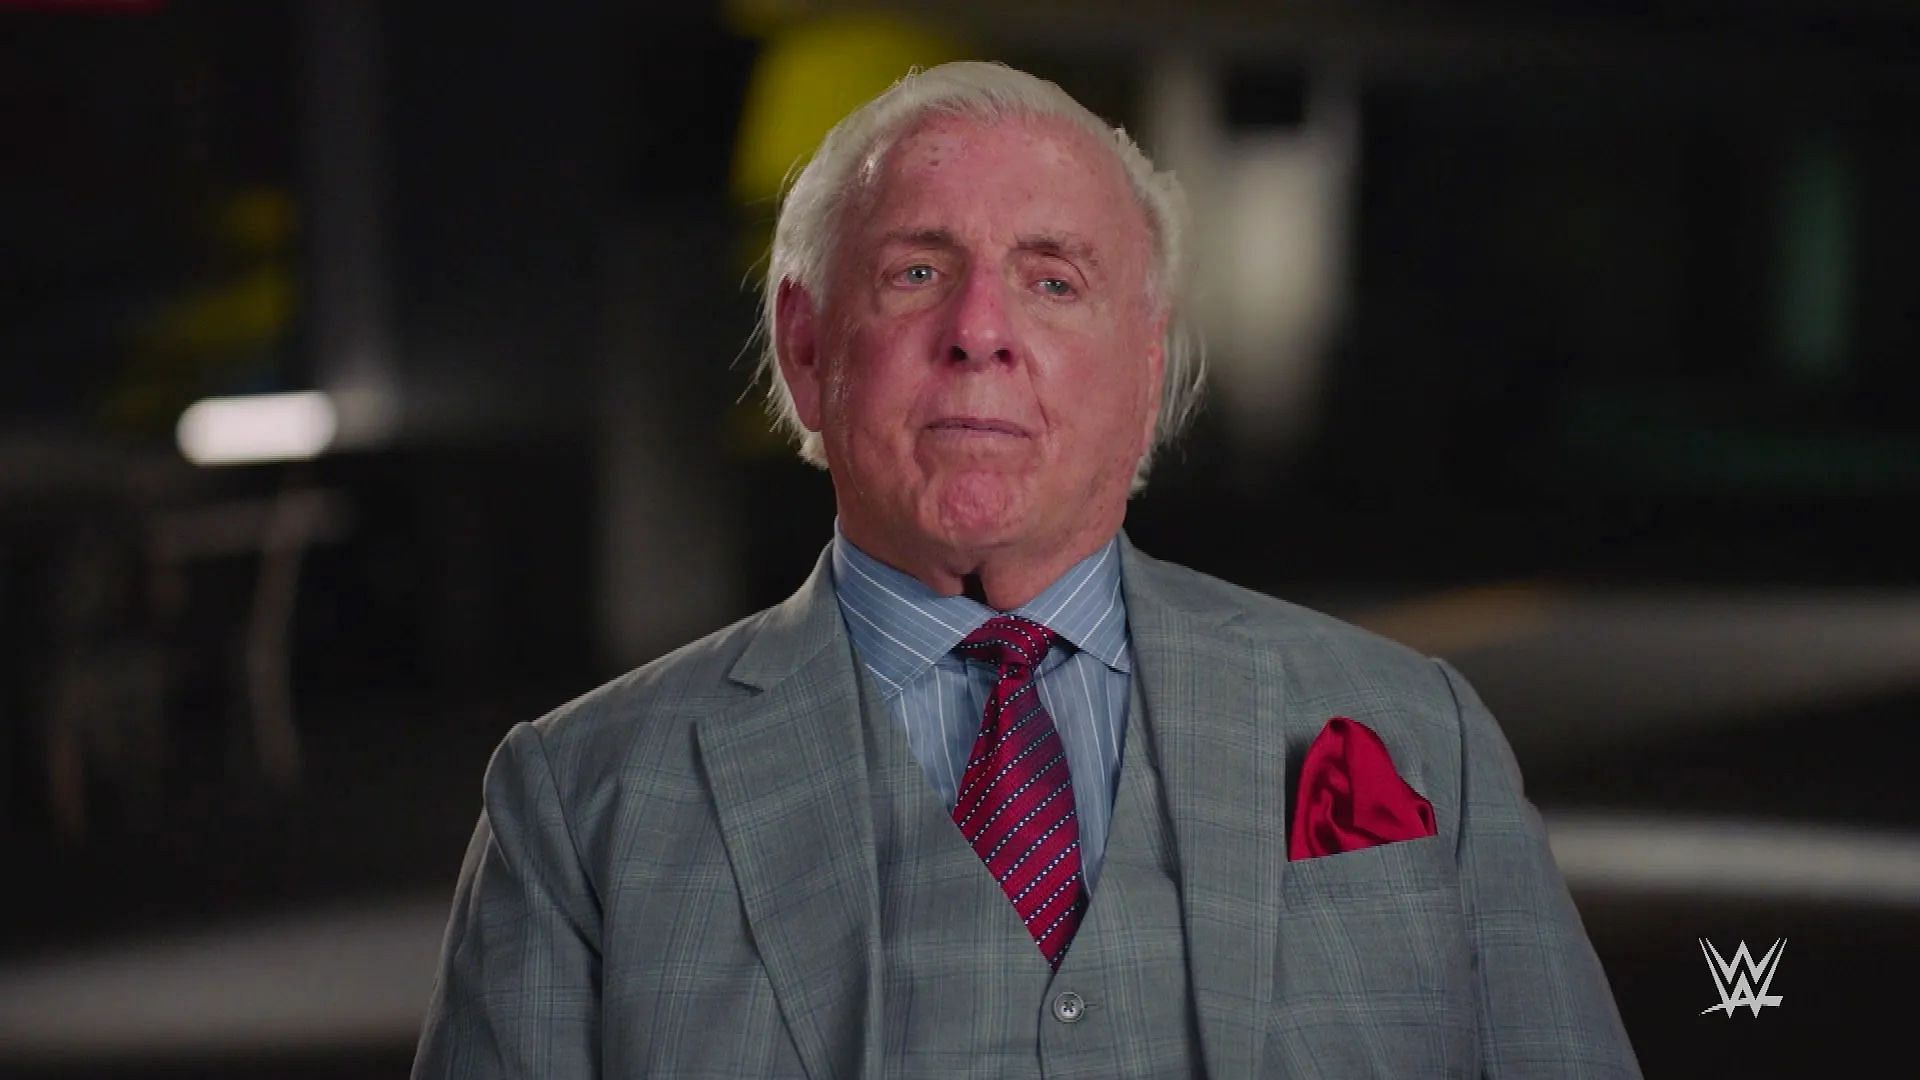 Ric Flair &quot;retired&quot; at WrestleMania 24